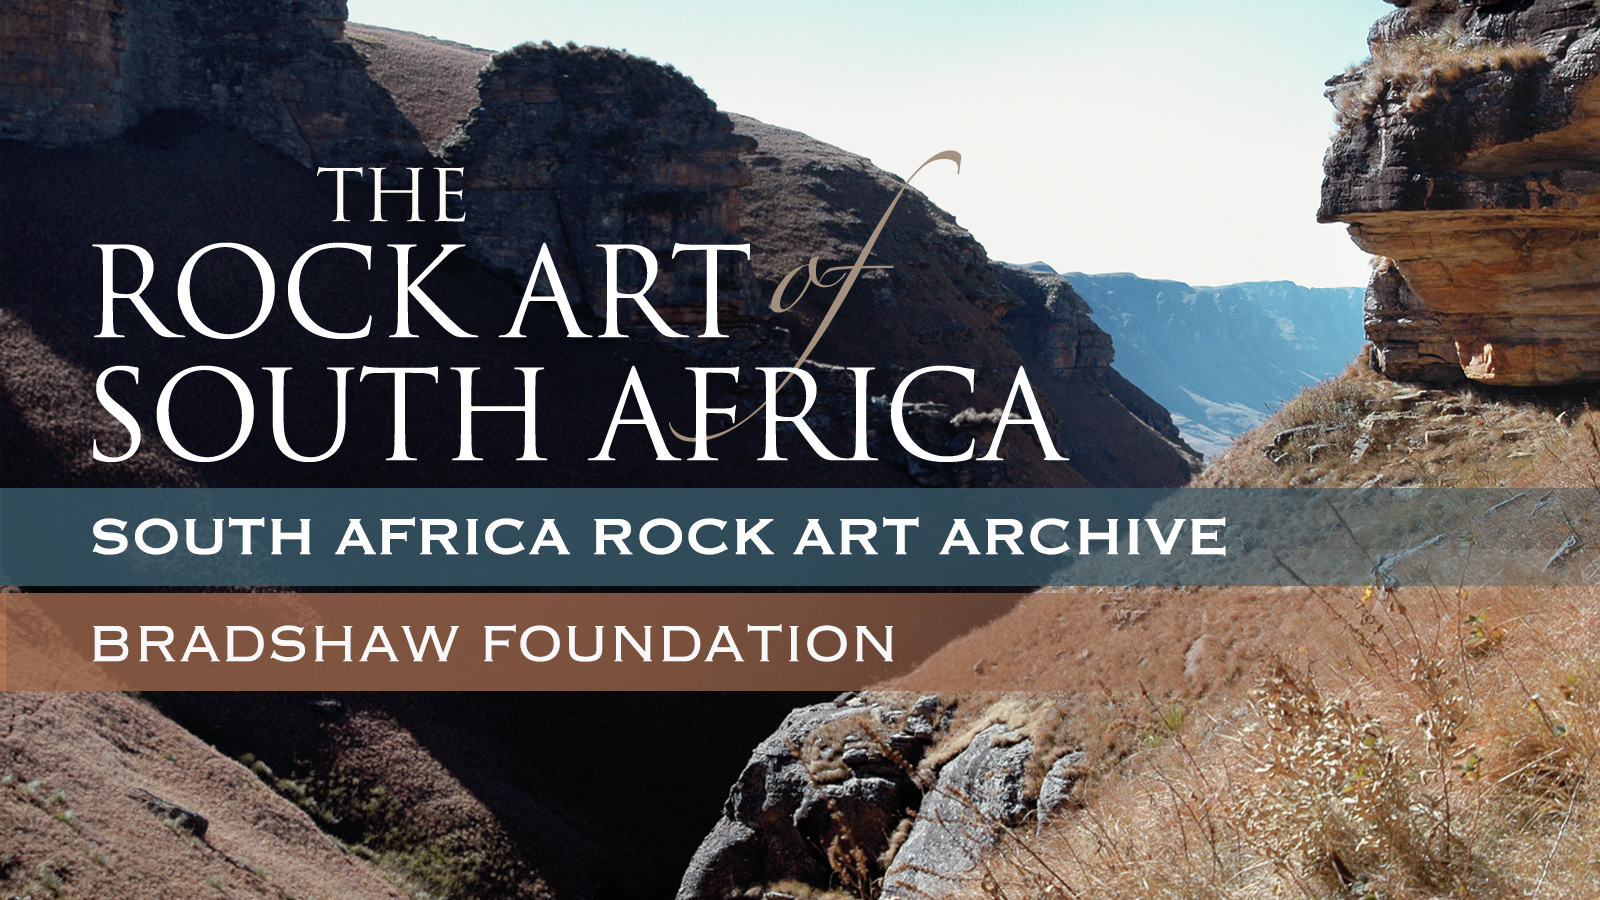 The South Africa Rock Art Gallery